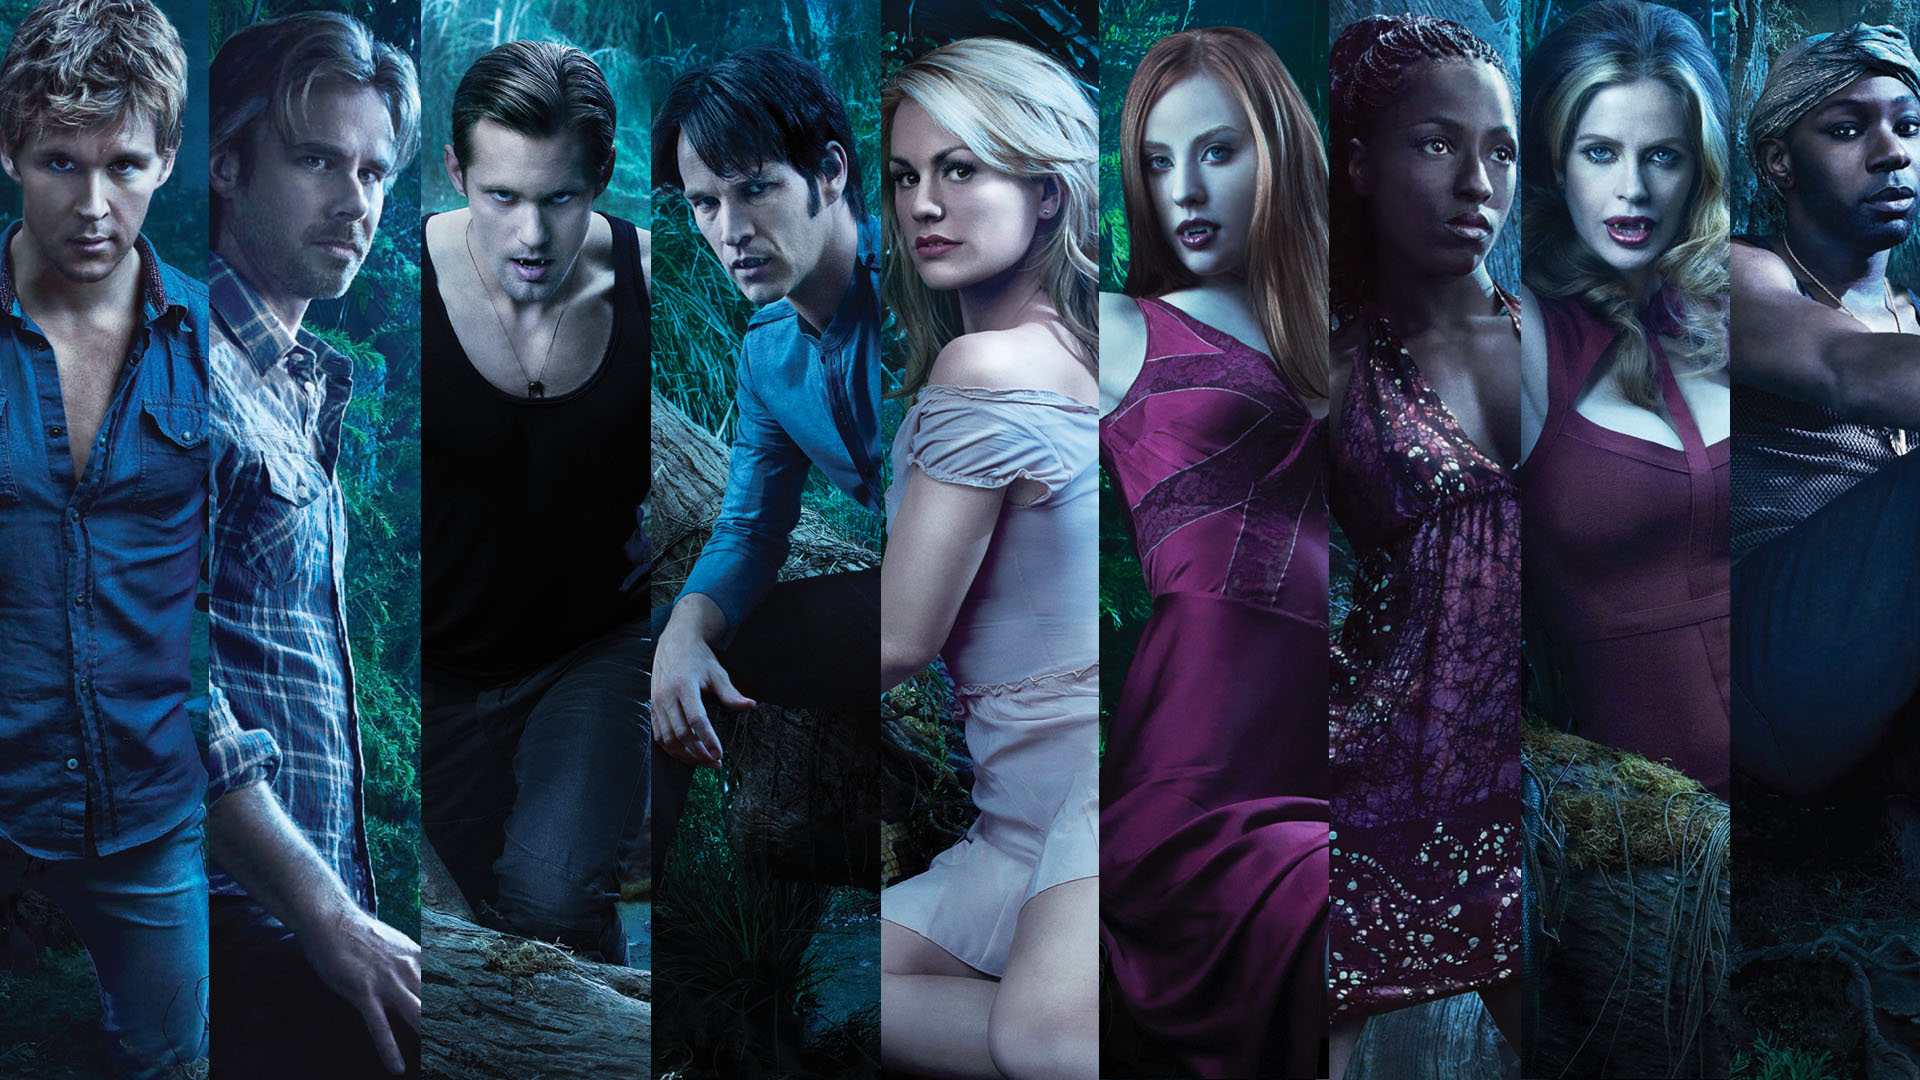 True blood tv series hd wallpaper - Background Wallpapers for your